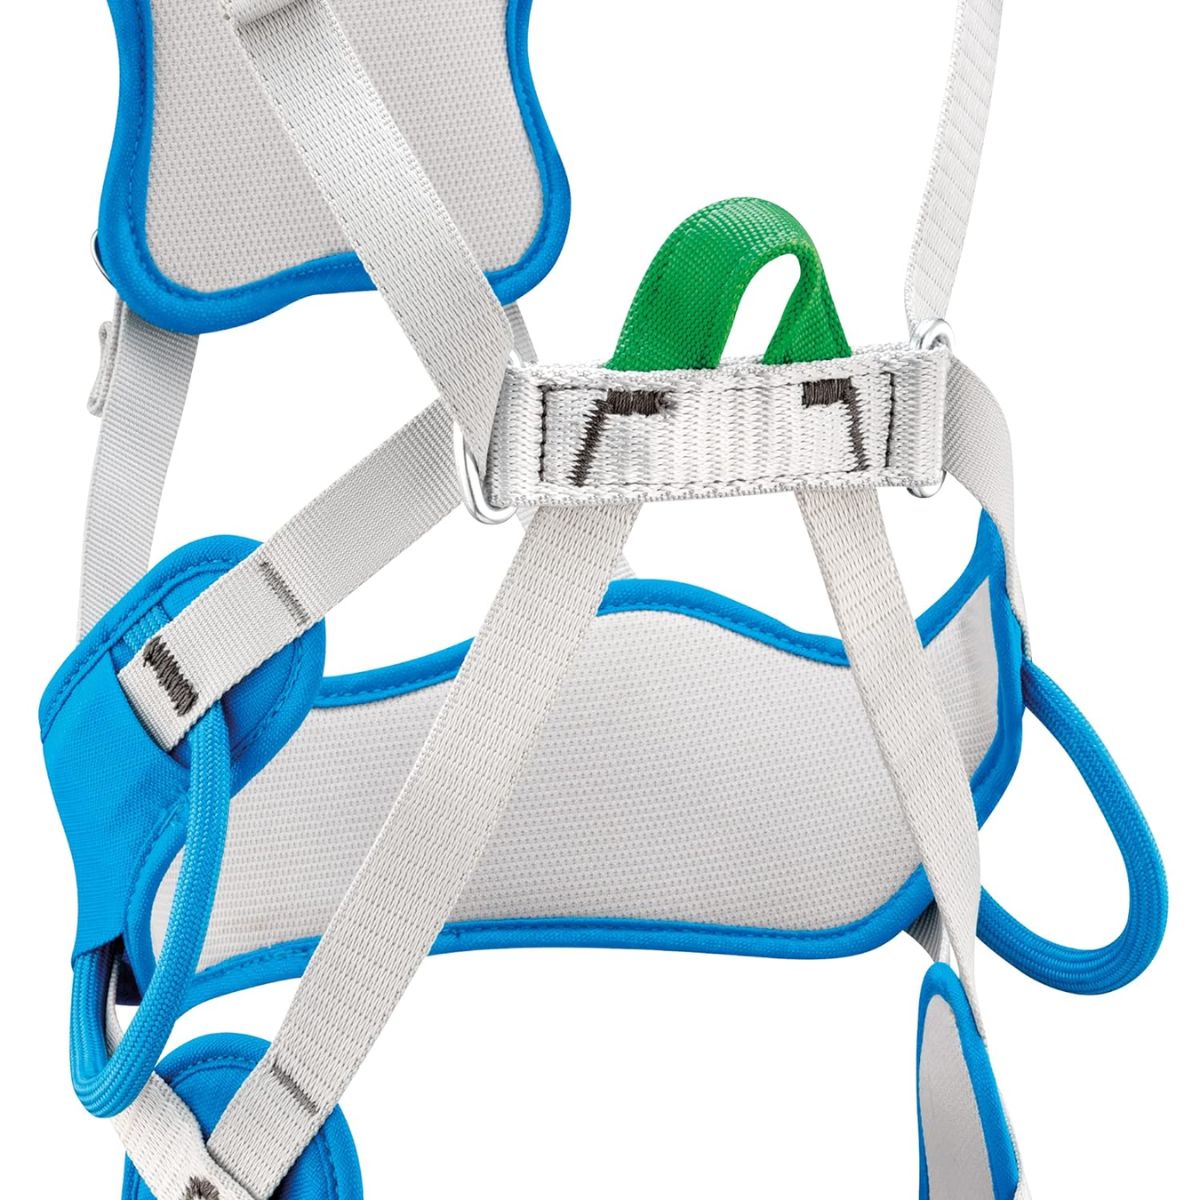 Ouistiti Harness for Kids - Blue 4